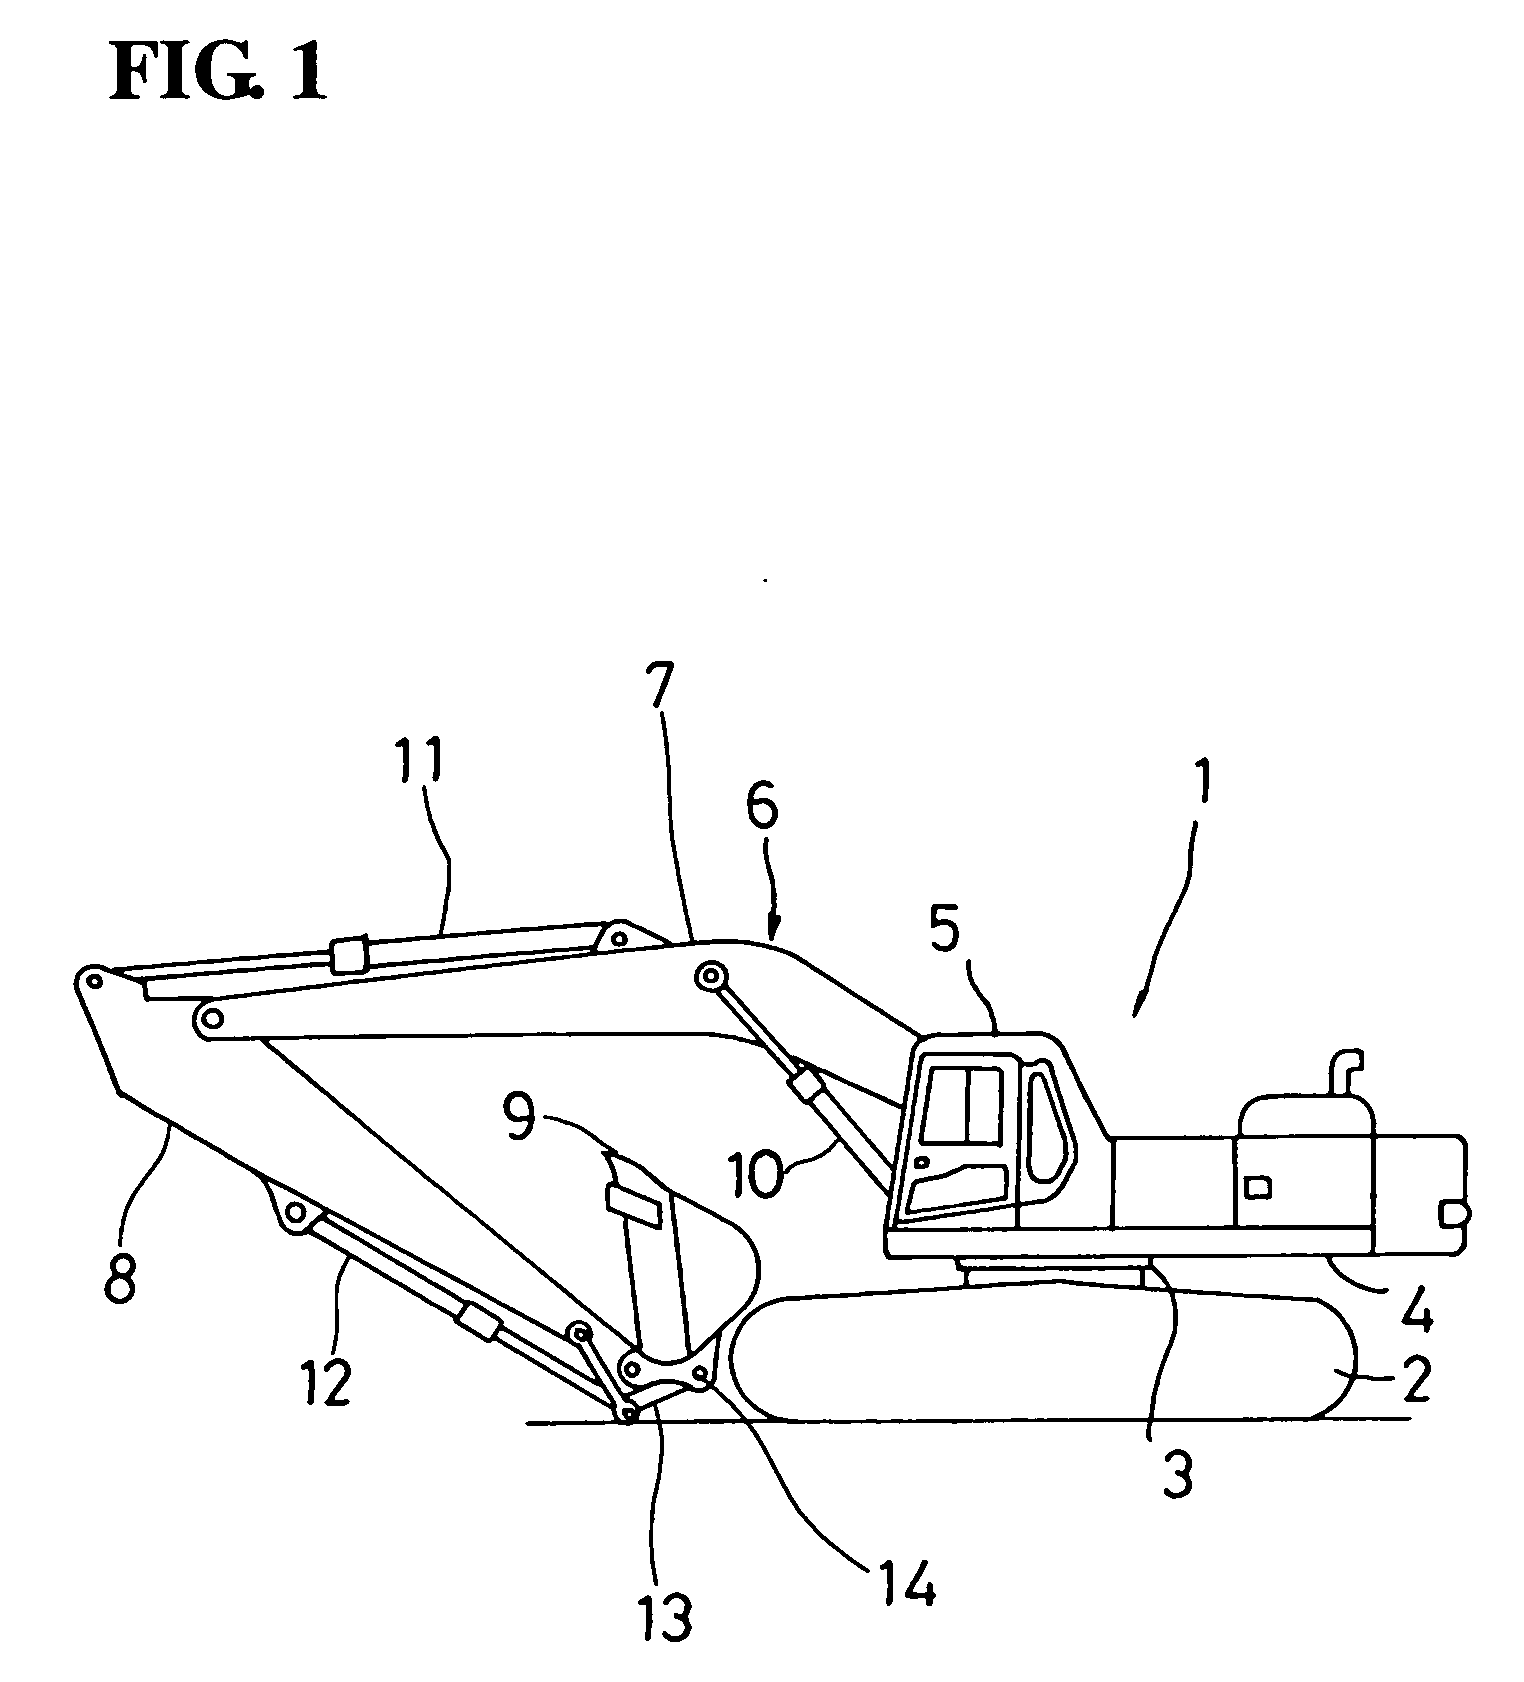 Working machine having prime mover control device